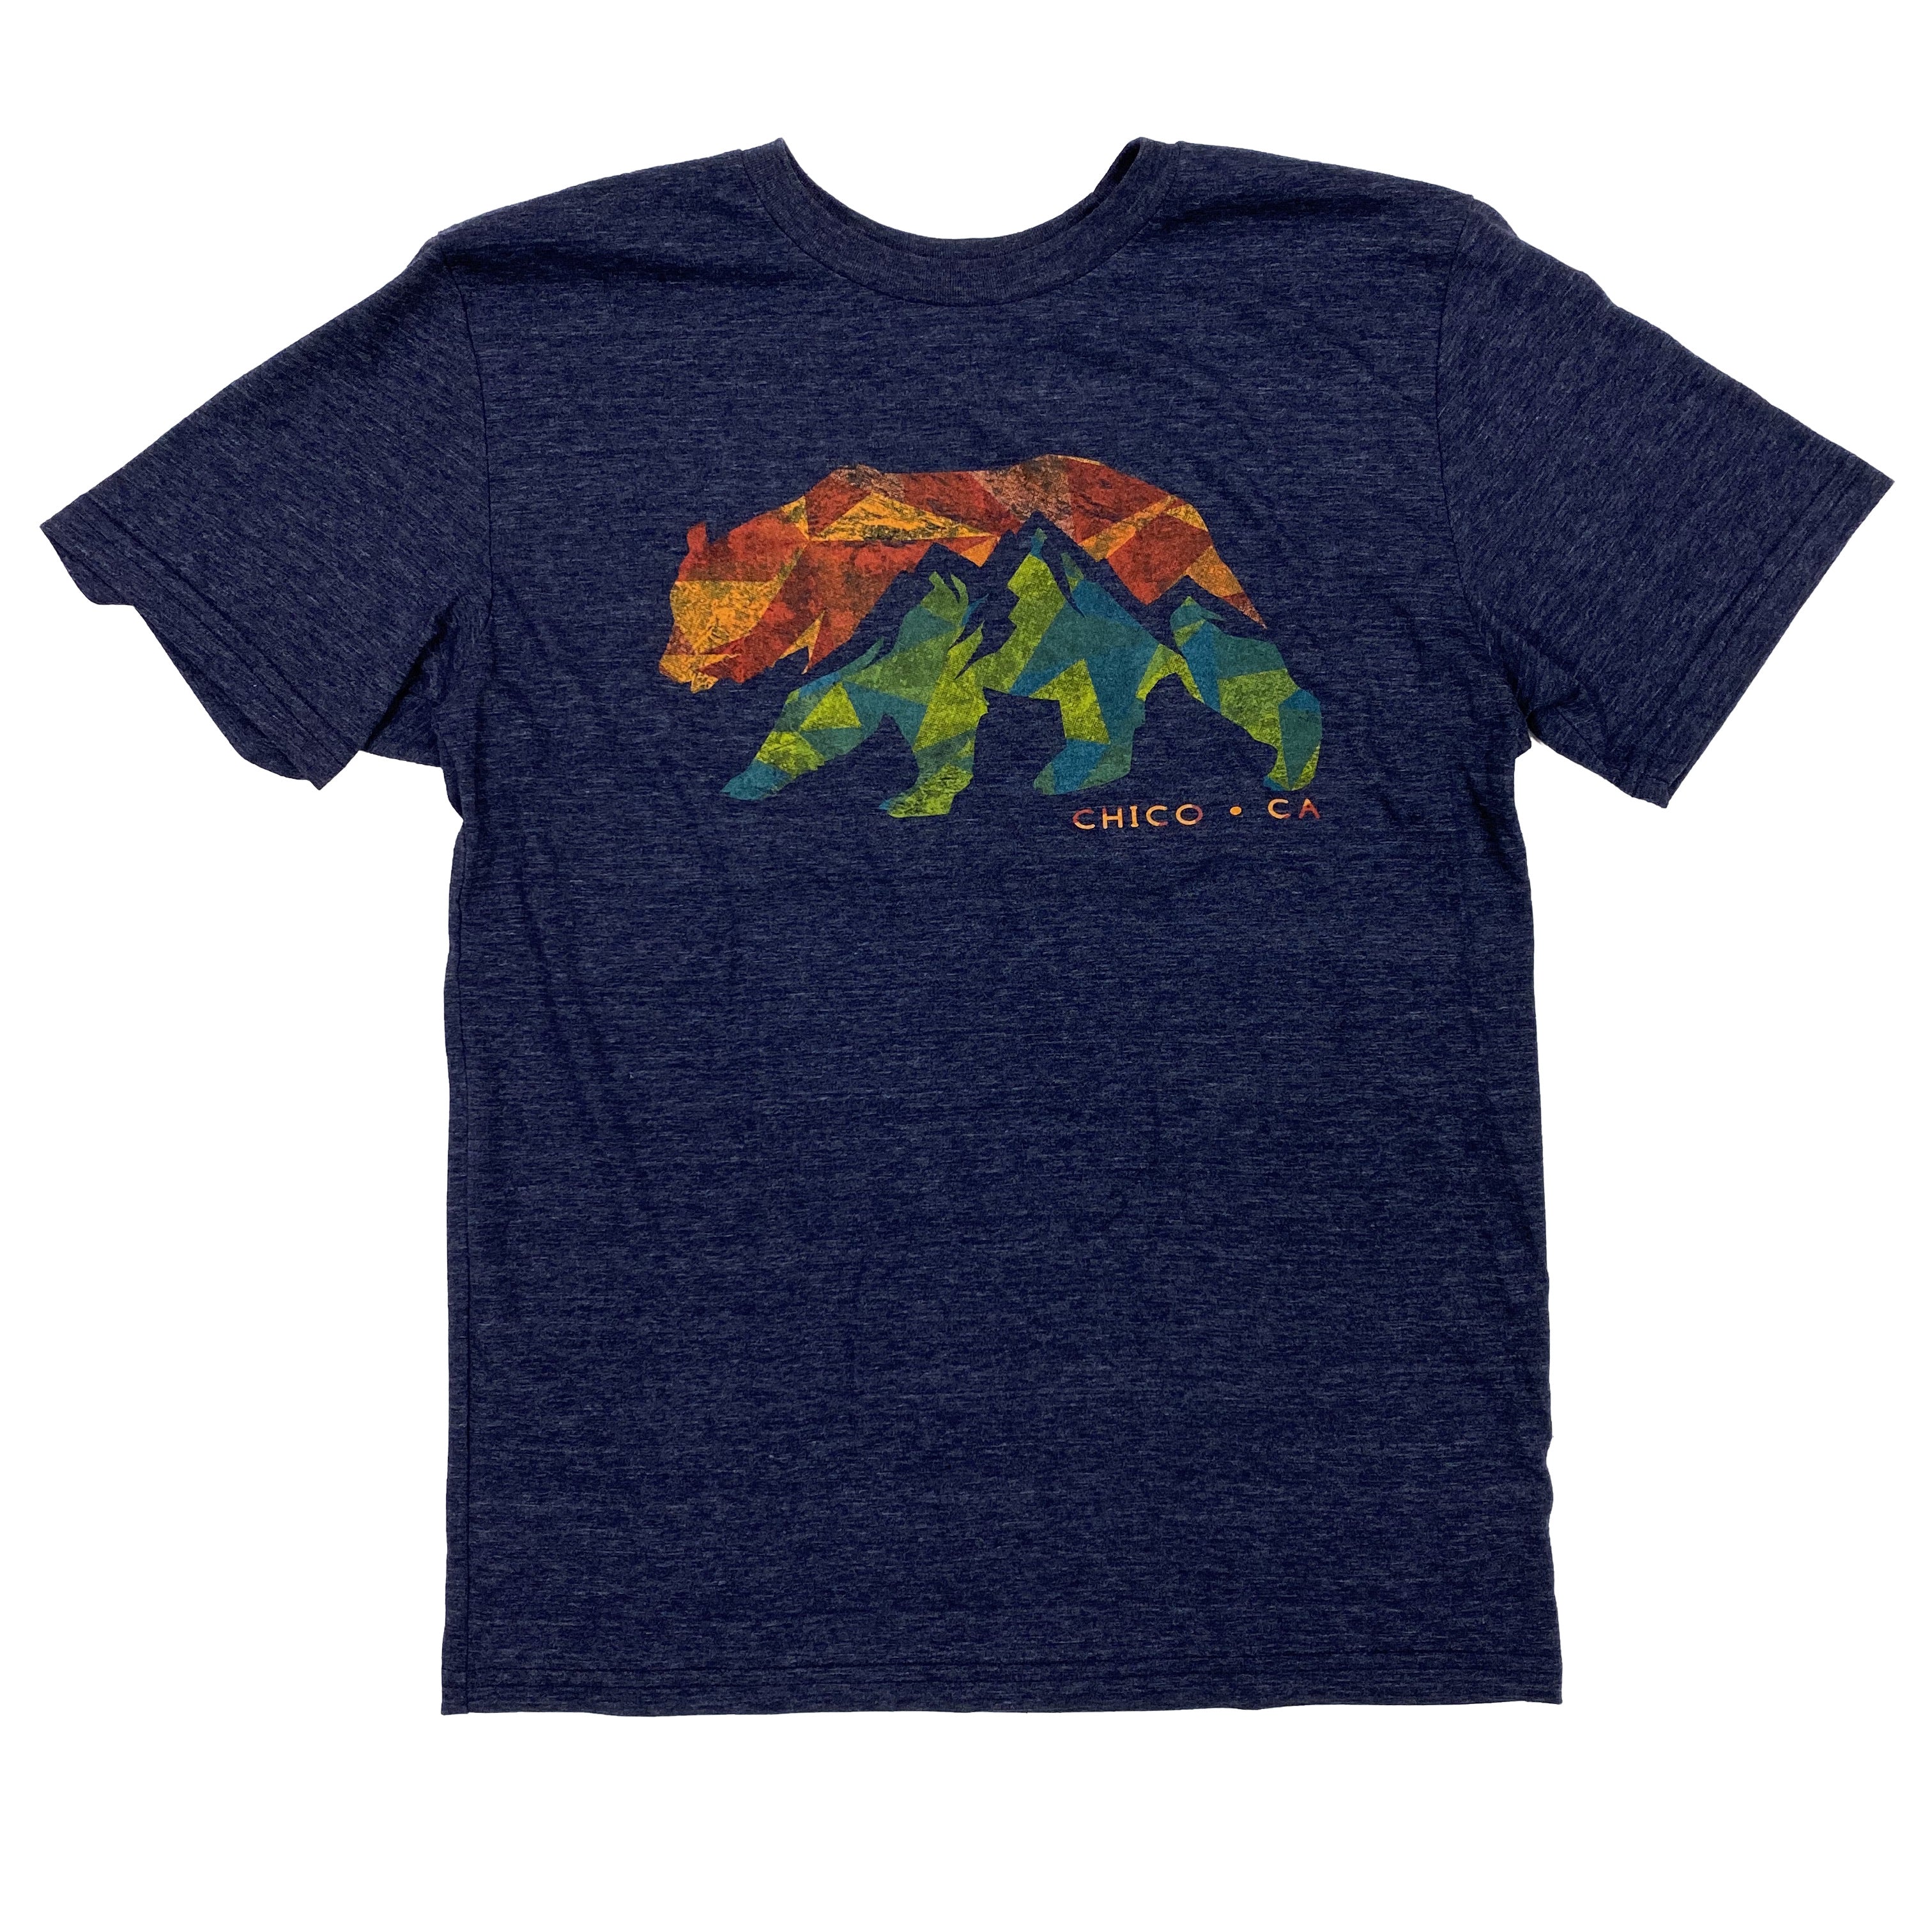 Remnant Bear Chico - T-Shirt NAVY S  3256110.1